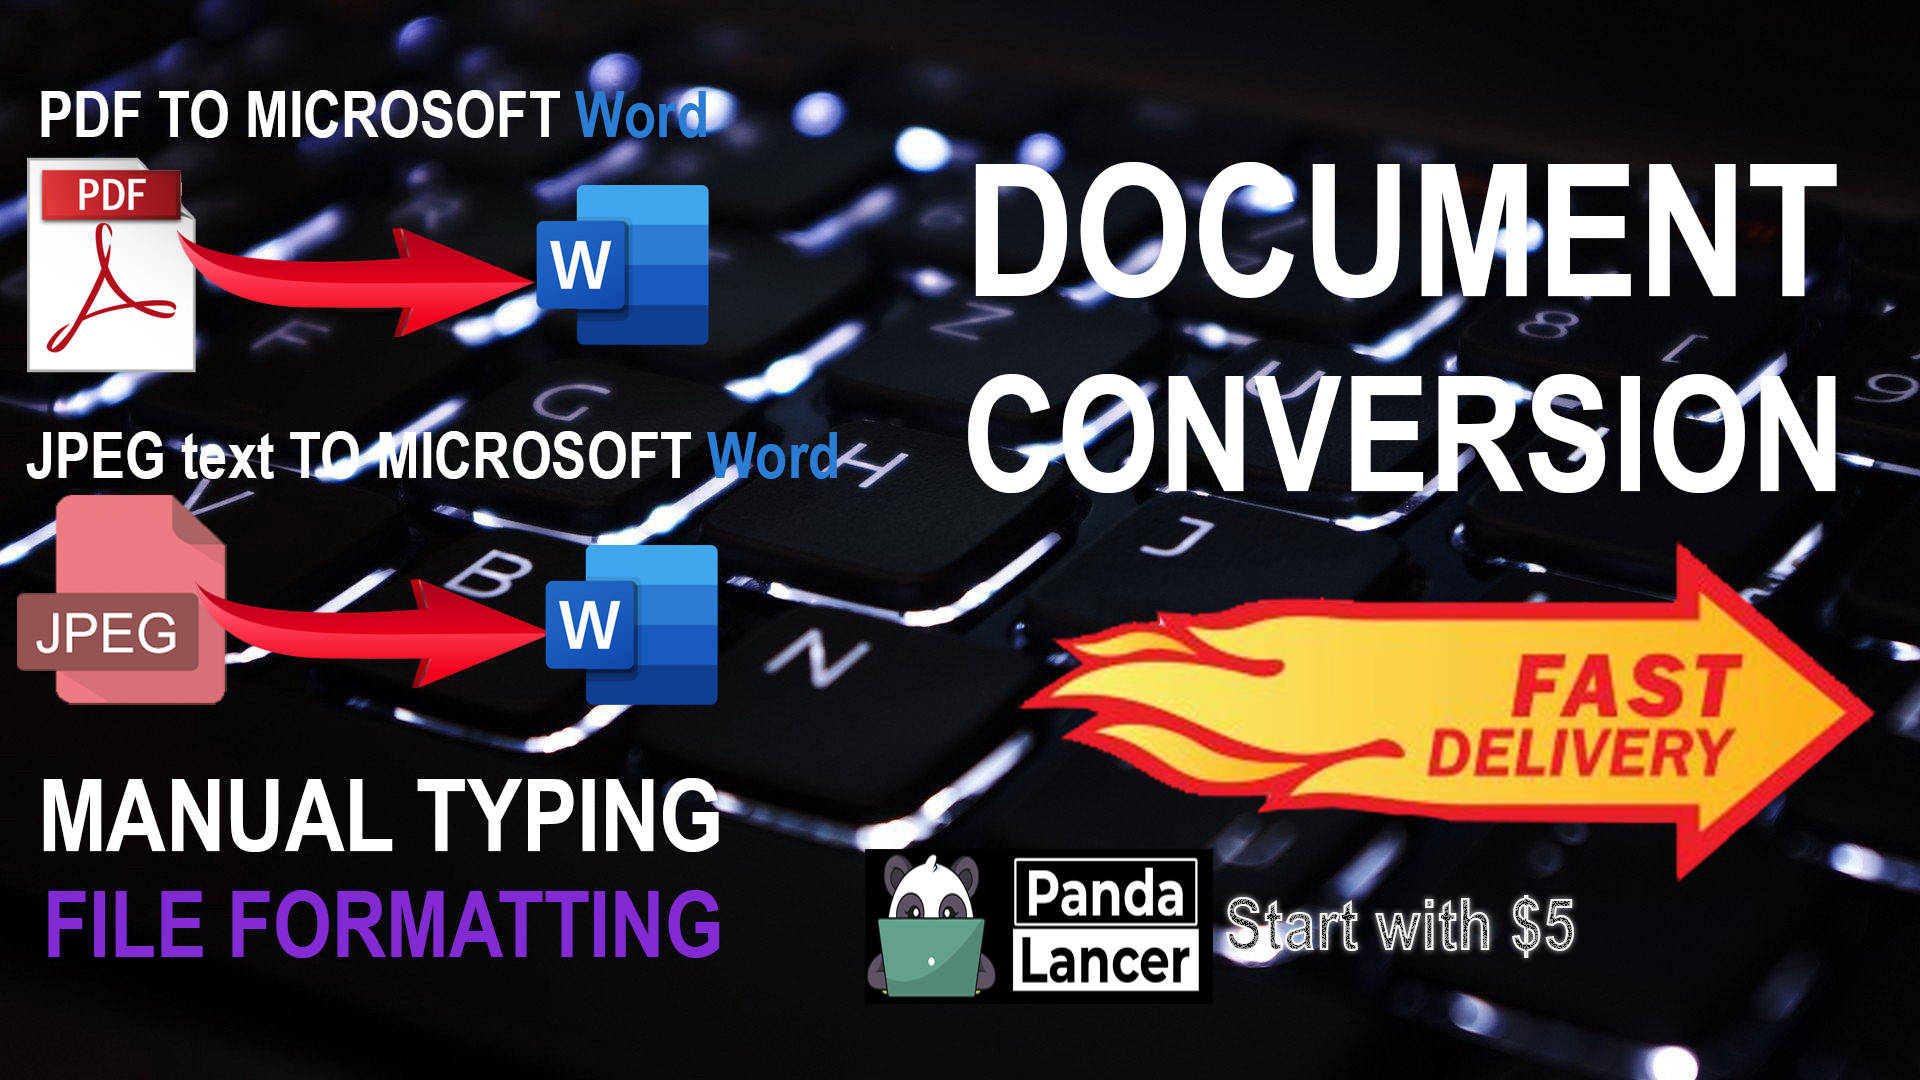 33247I will convert your PDF or picture text to Microsoft word documents